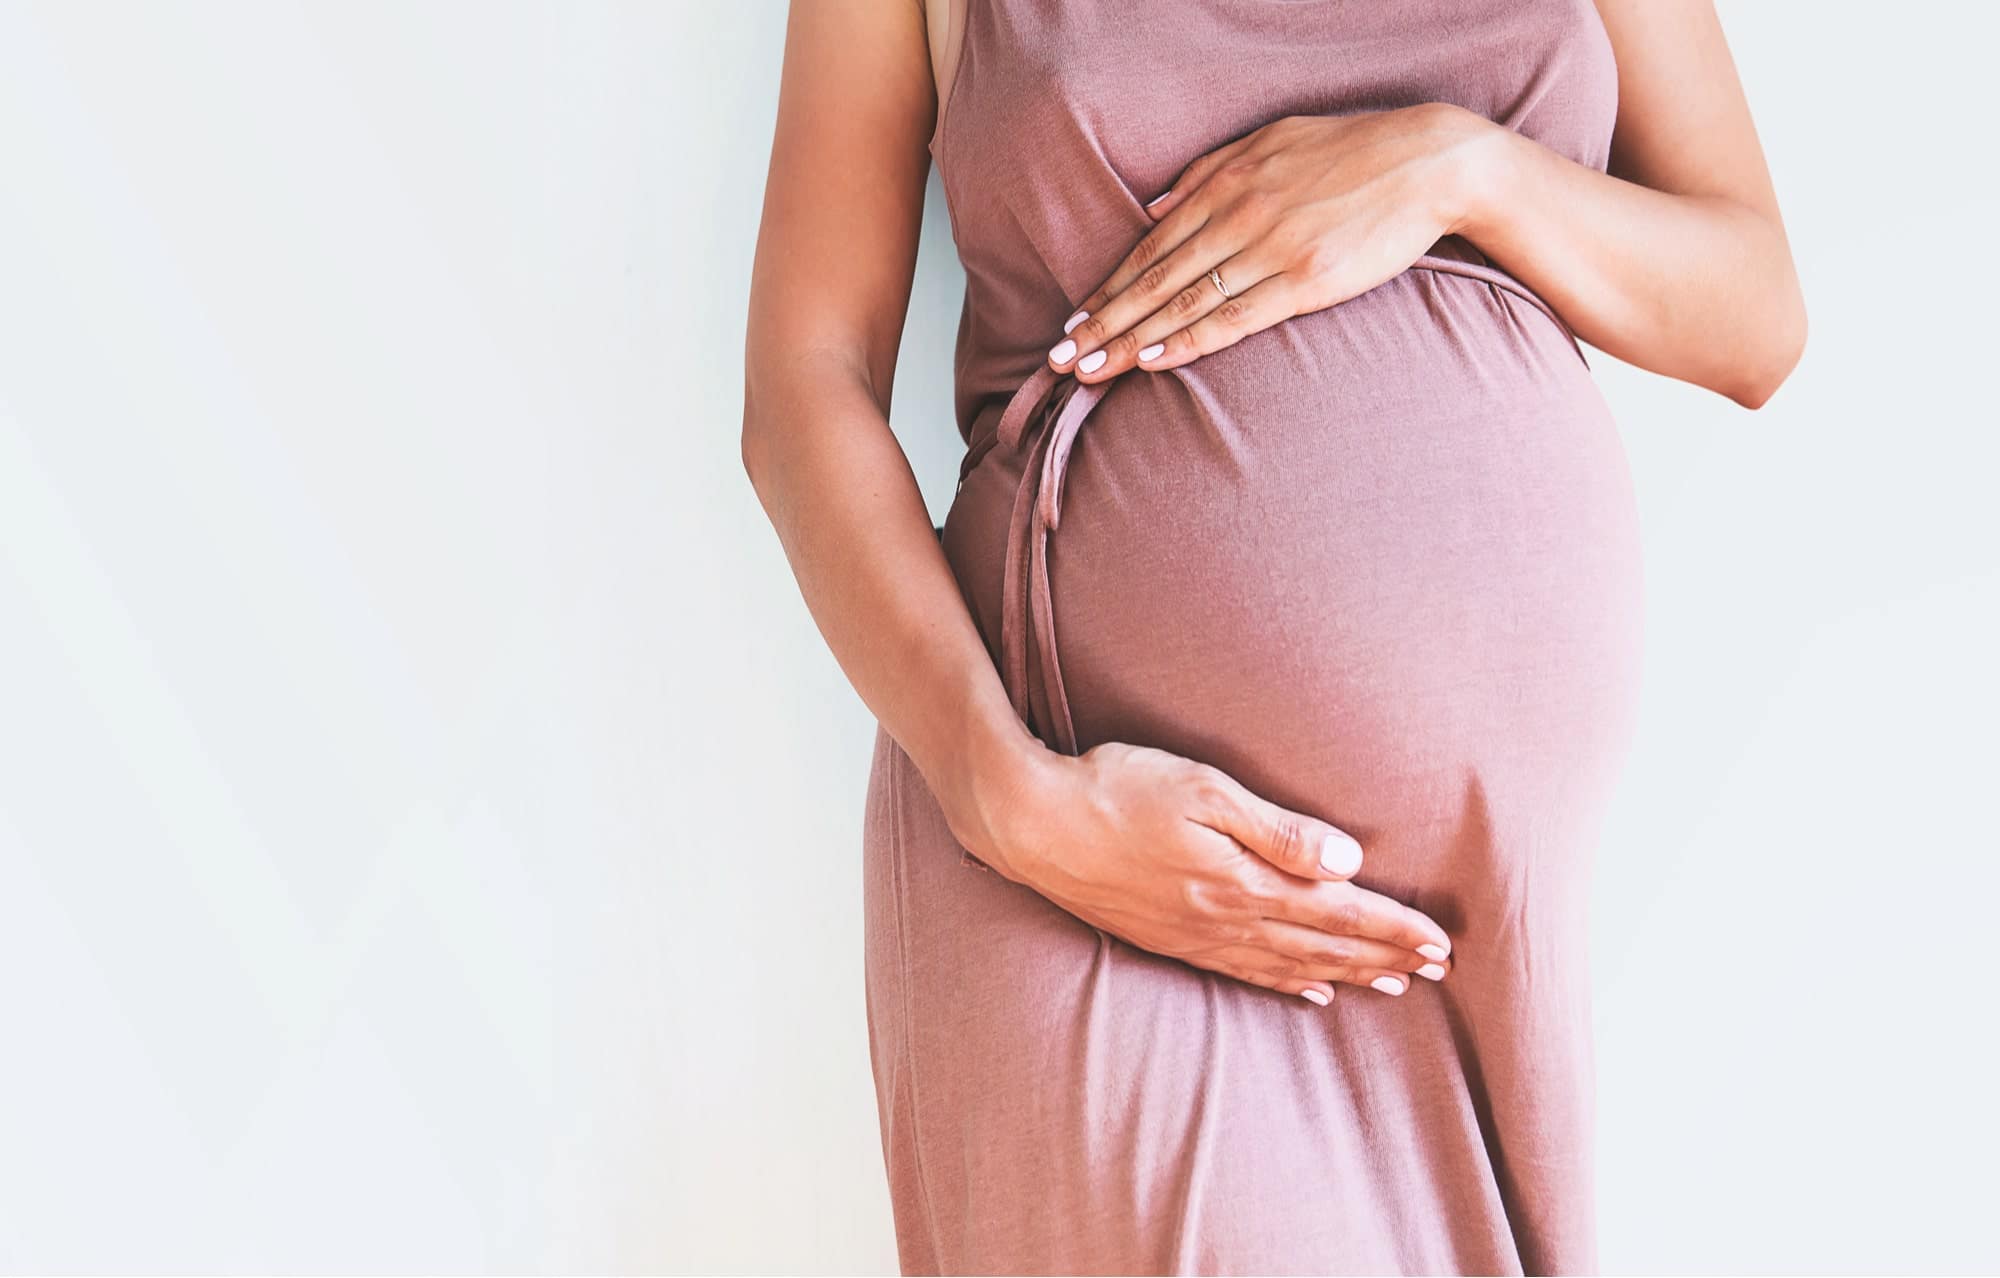 CBD and Pregnancy: Can You Use CBD While Pregnant?